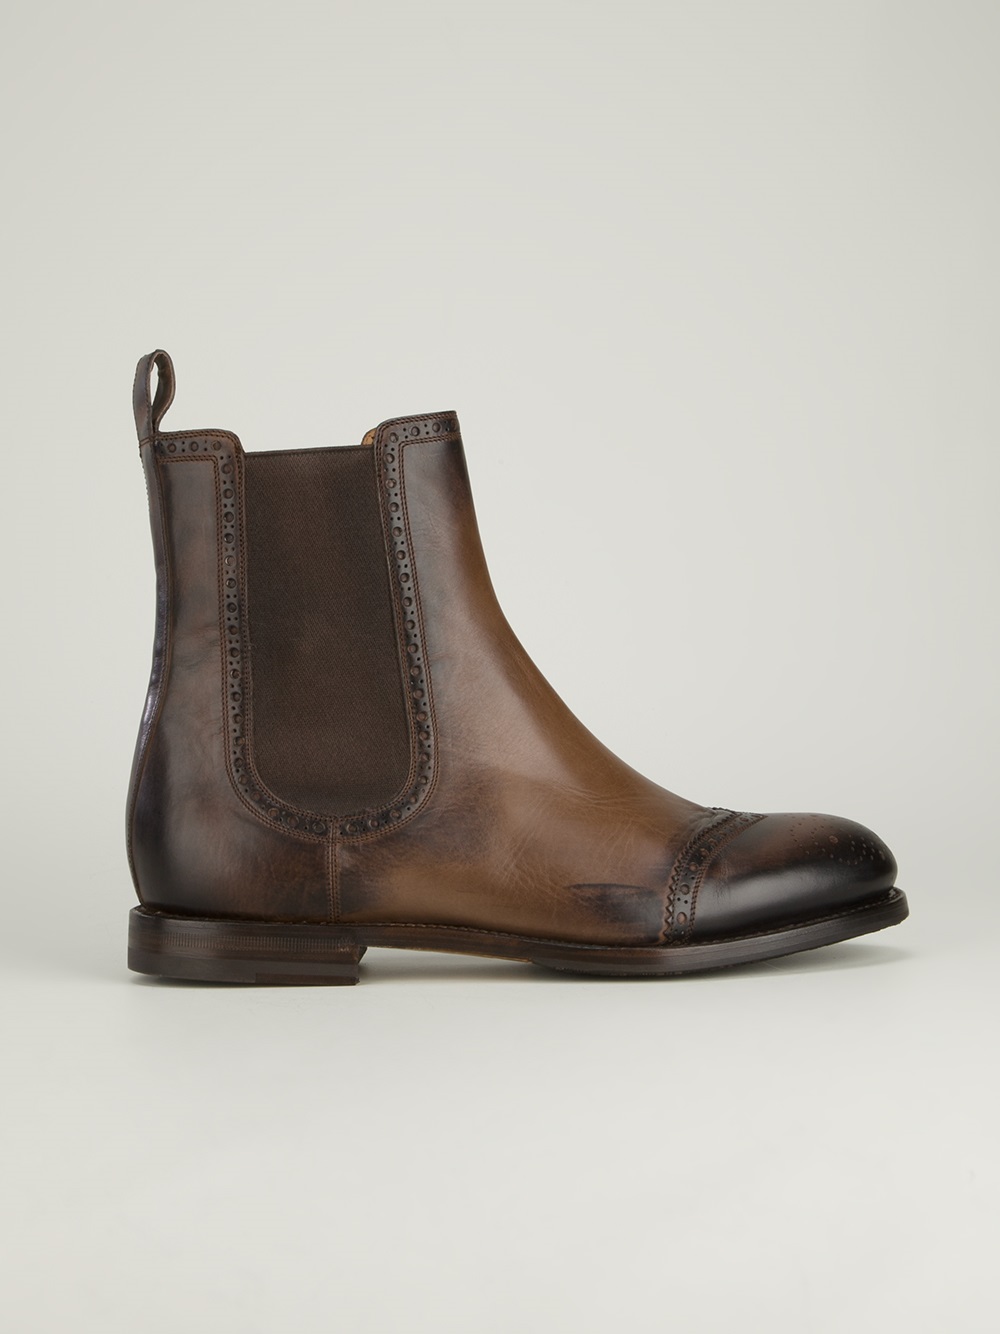 Lyst - Gucci Brogue Chelsea Boot in Brown for Men